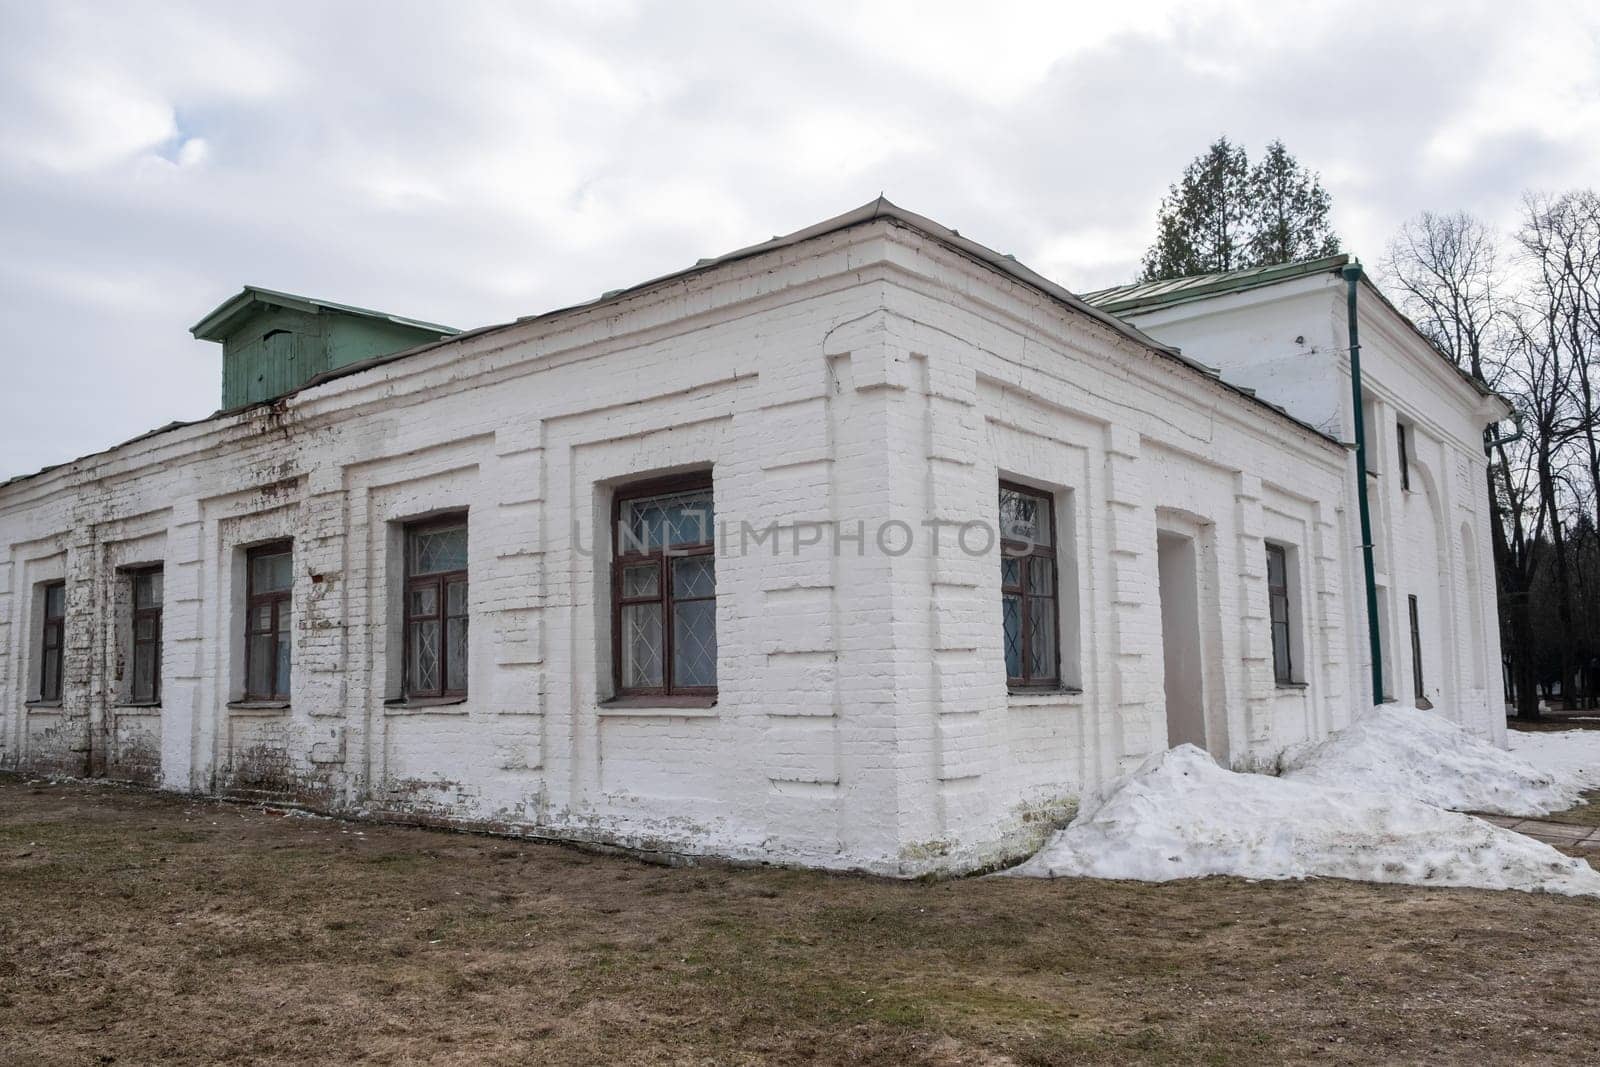 Serednikovo manor, mansion, palace, white building. Equestrian building, arena in the Serednikovo estate in the Moscow region, a park-manor of the end of the XVIII beginning of the XIX century